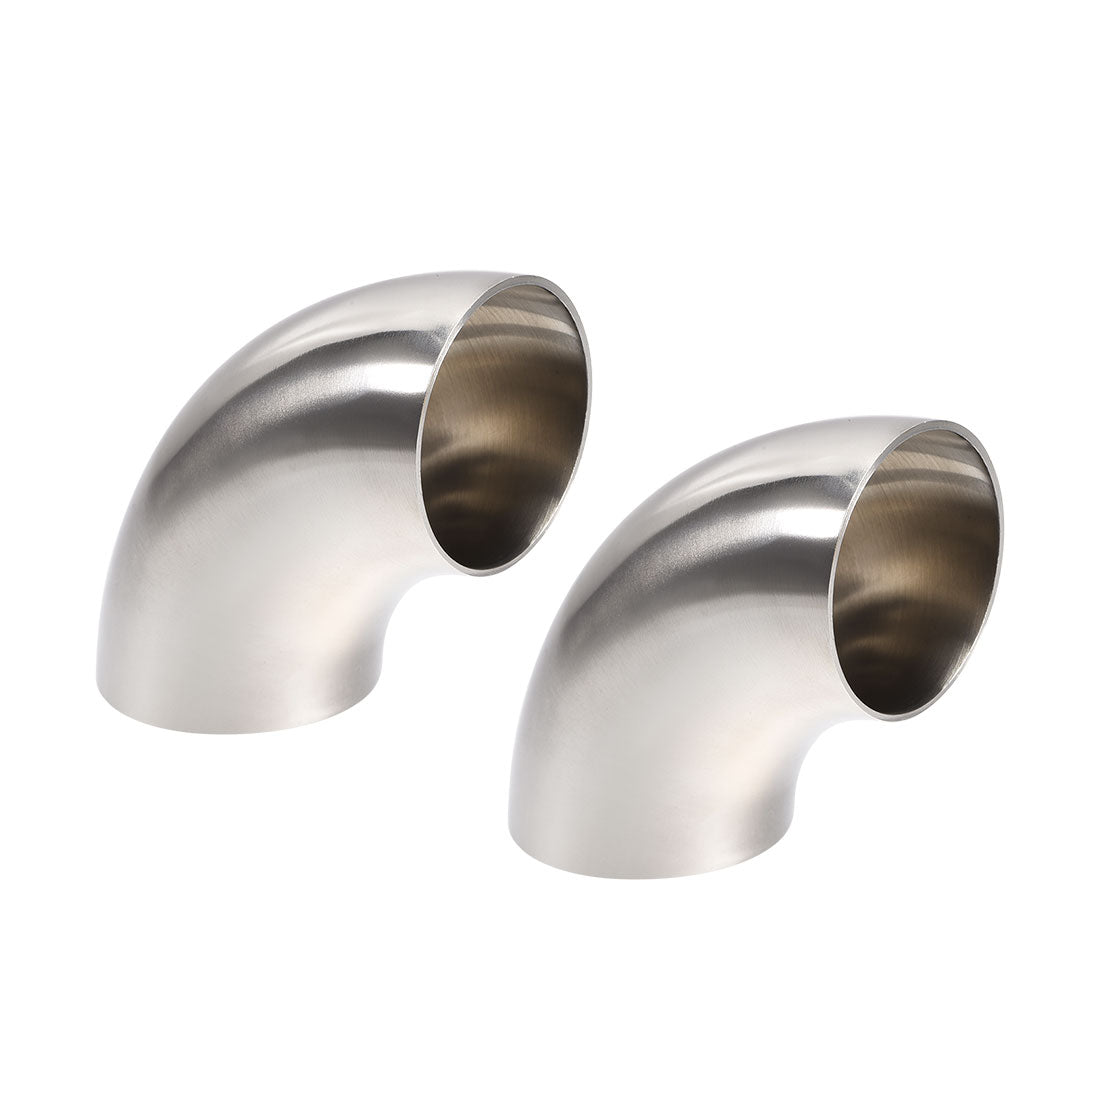 uxcell Uxcell Stainless Steel Vacuum Fitting Elbow 90 Degree Polished 1.77 Inch Tube OD 2pcs